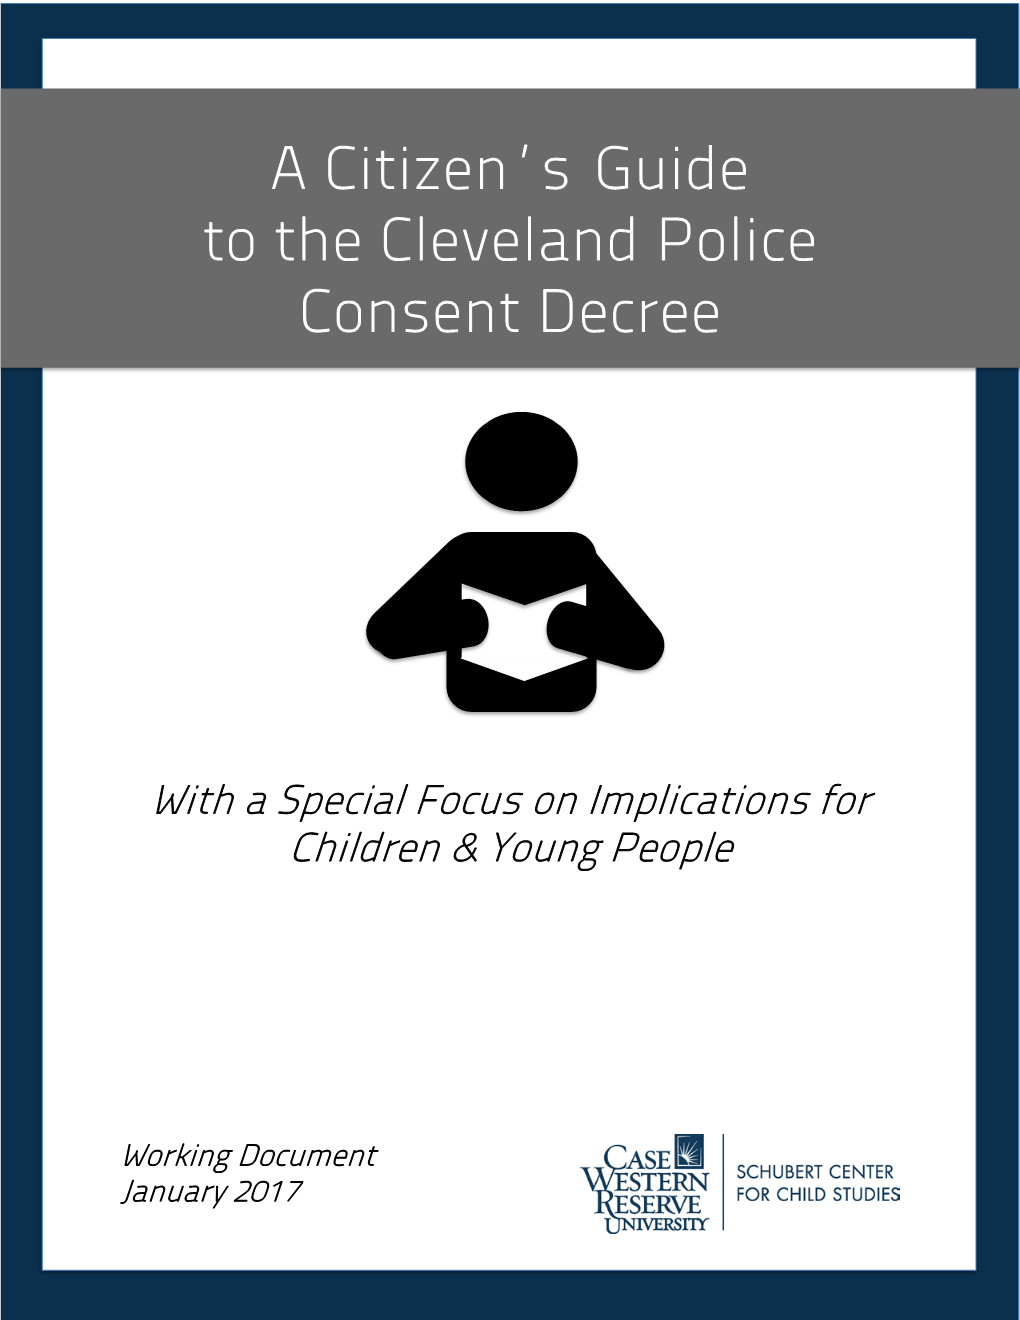 A Citizen's Guide to the Cleveland Police Consent Decree